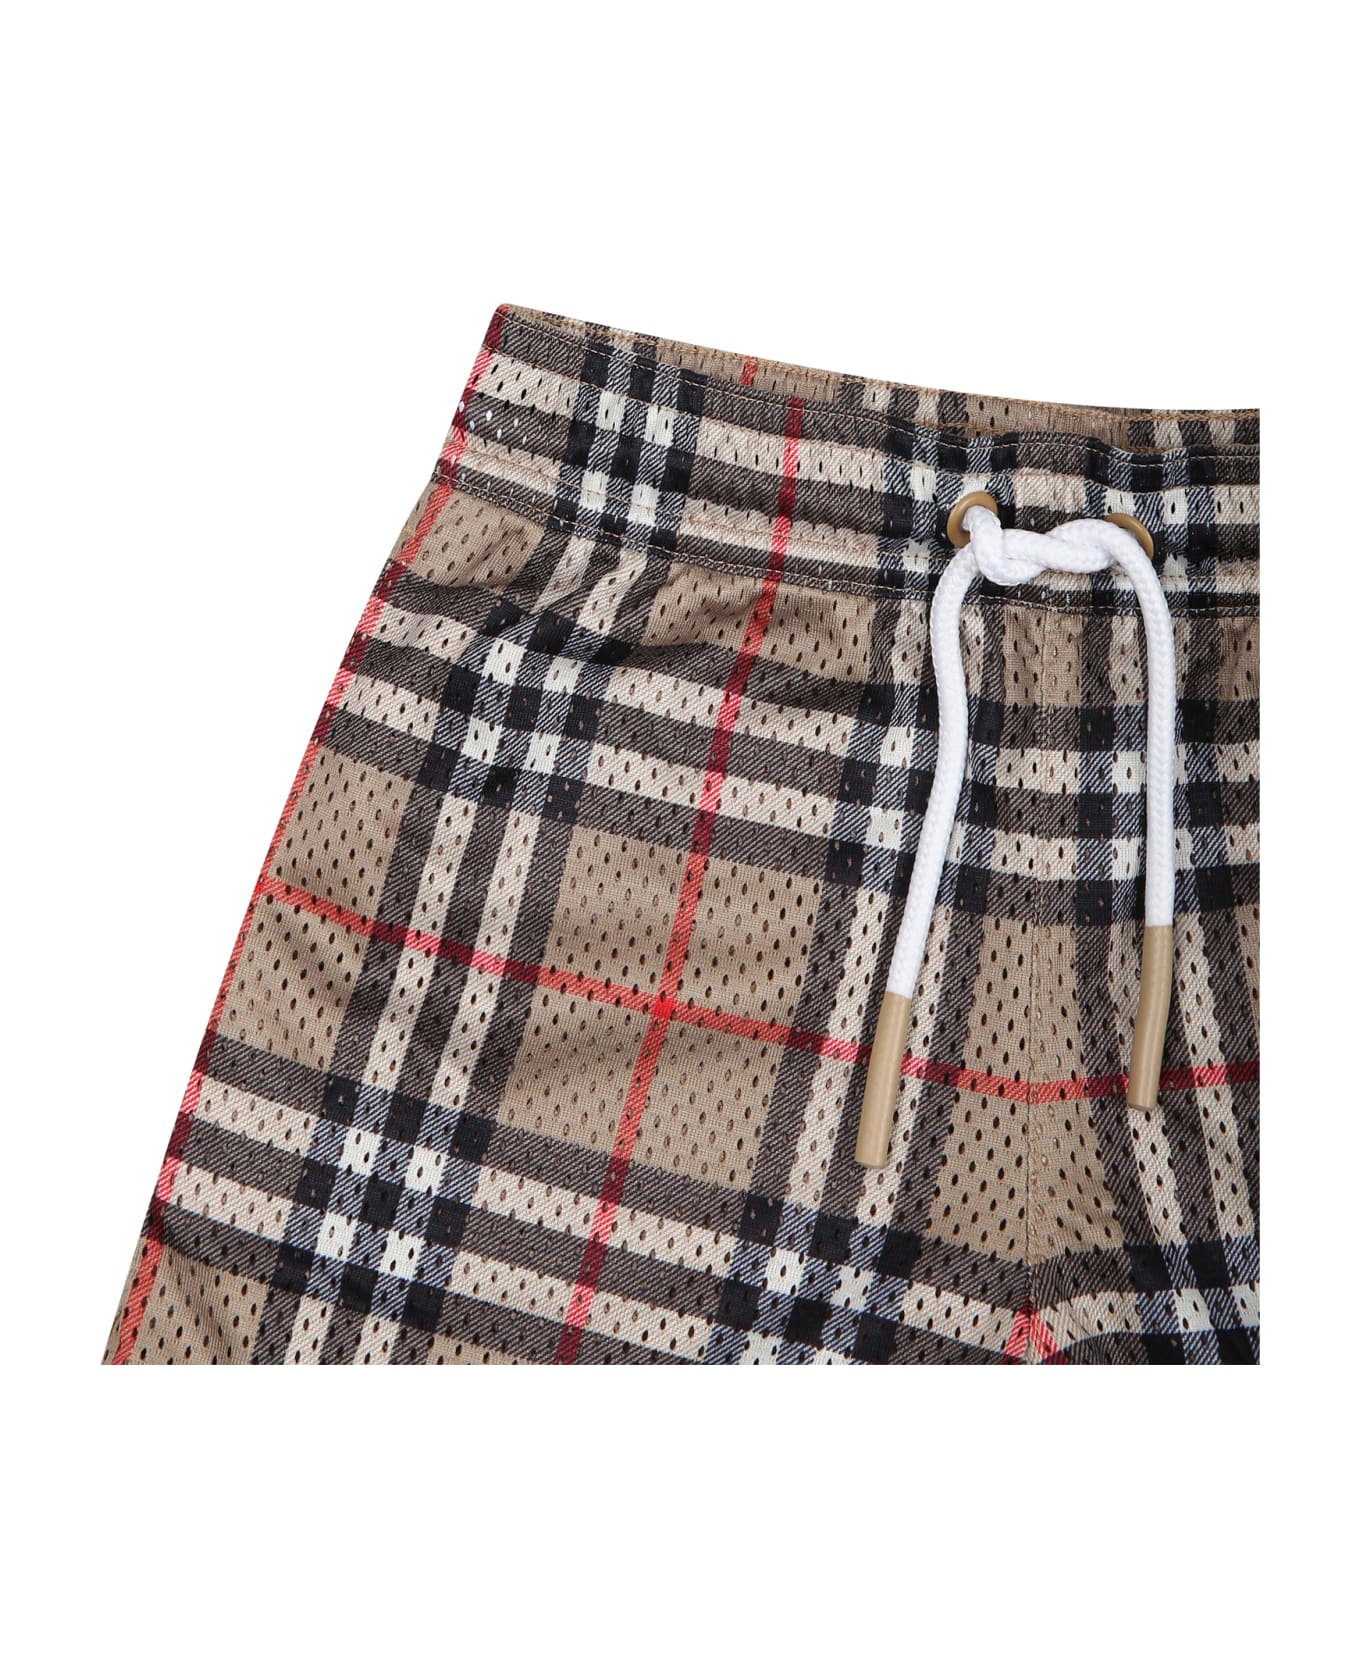 burberry Giant Beige Sports Shorts For Baby Boy With Iconic Vintage Check - Beige